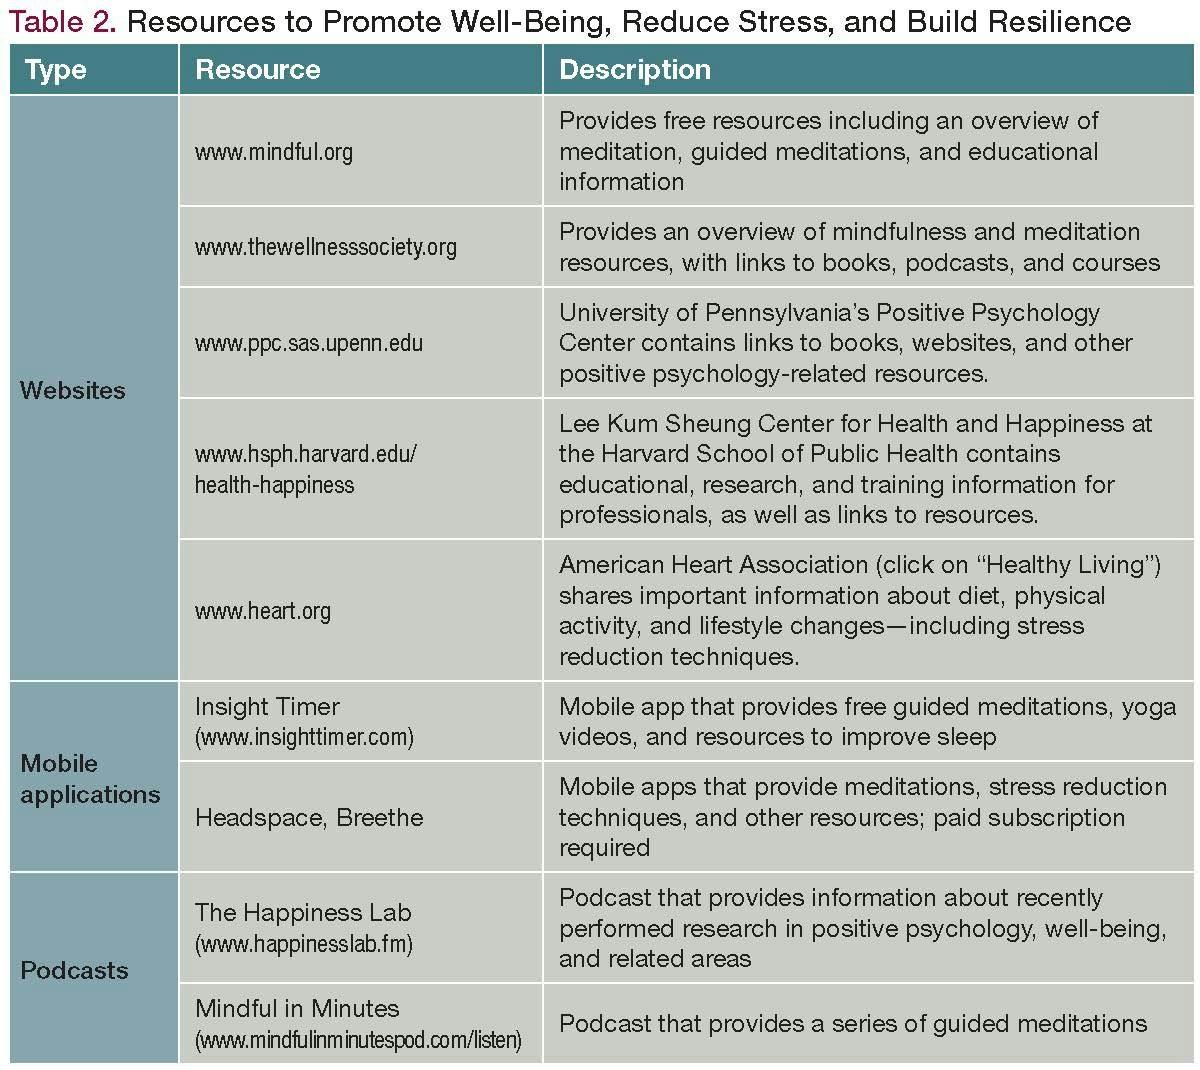 Table 2. Resources to Promote Well-Being, Reduce Stress, and Build Resilience